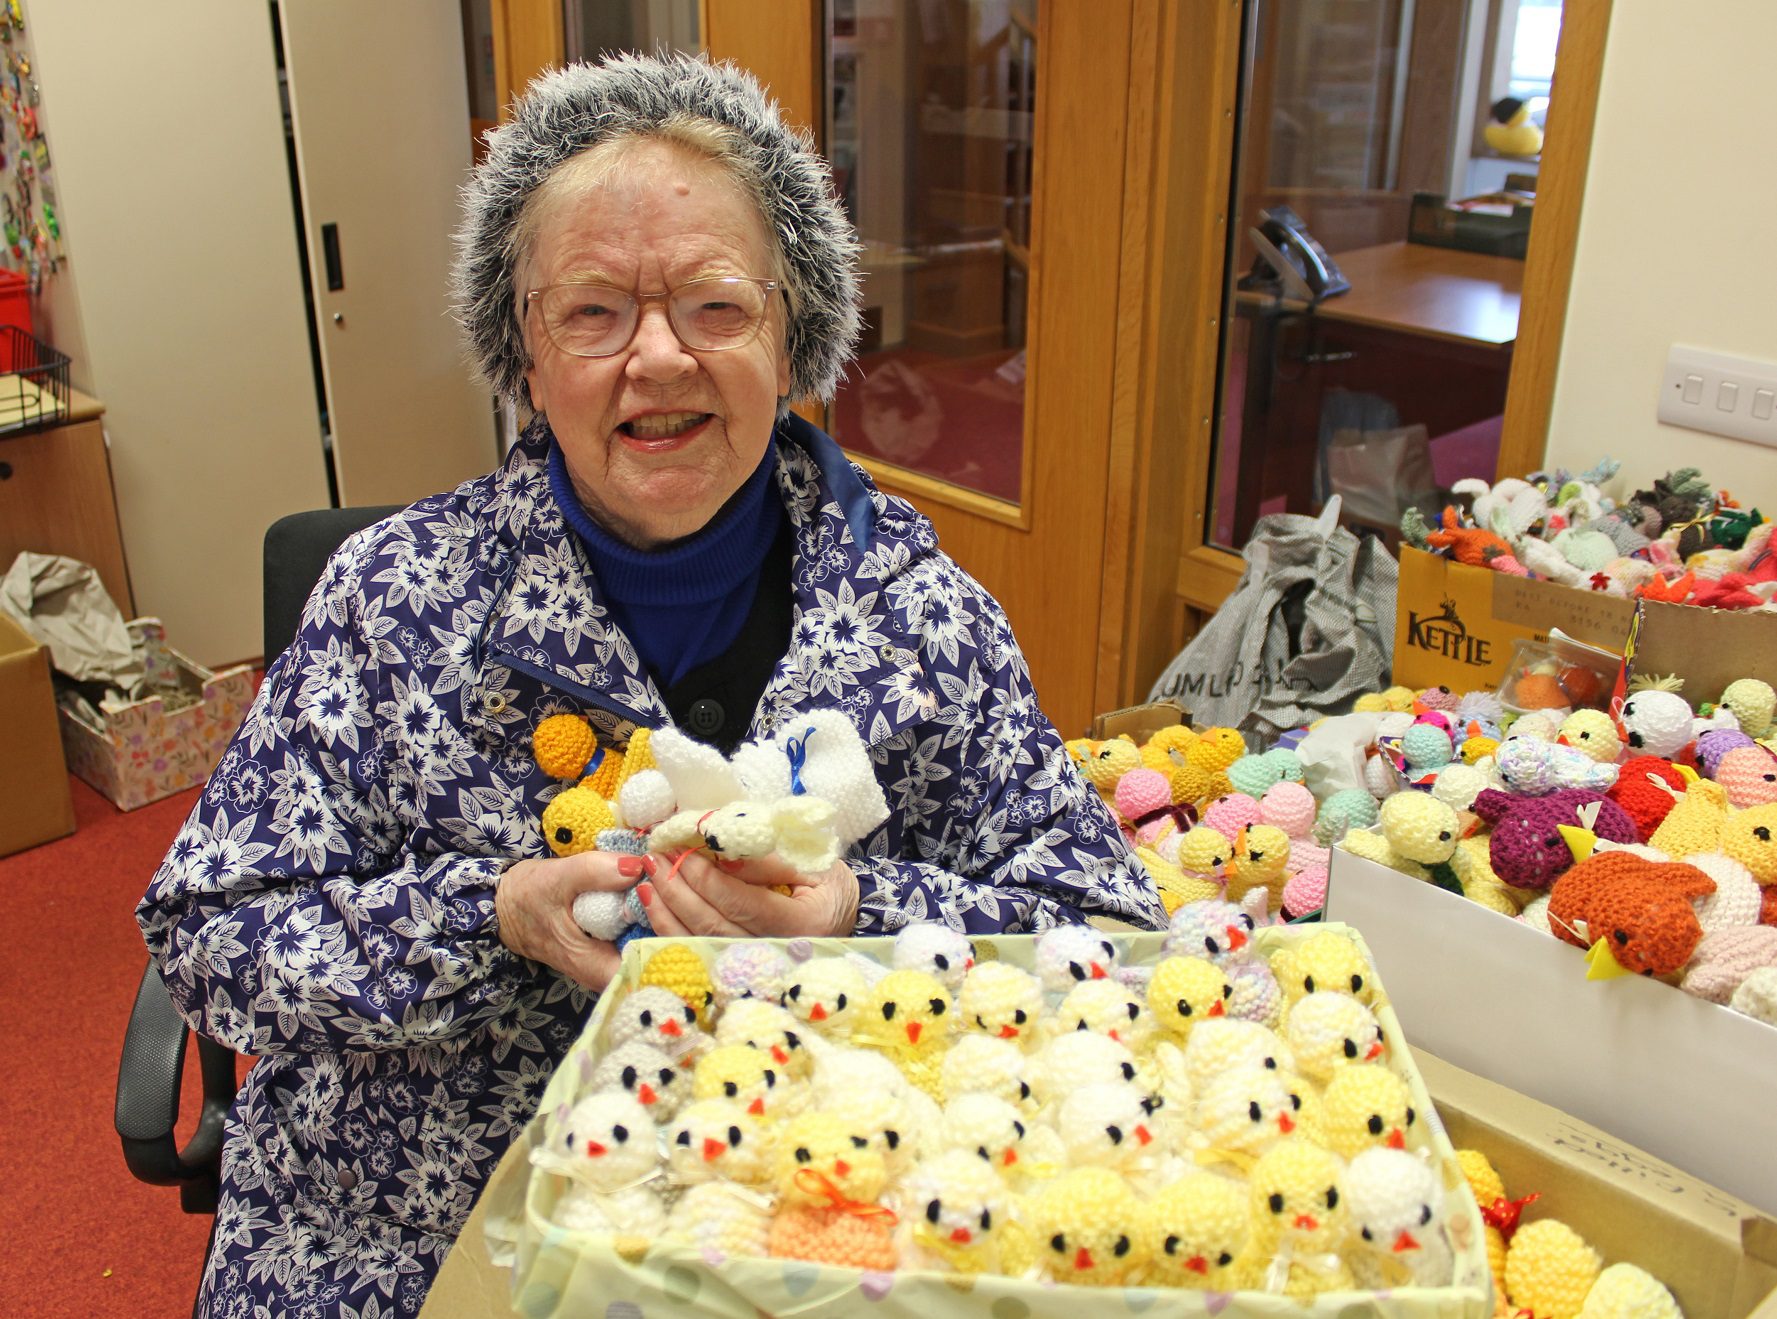 Woman wearing a woolly hat and patterned coat holding yellow knitted chicks sat behind a box of knitted chicks on a table